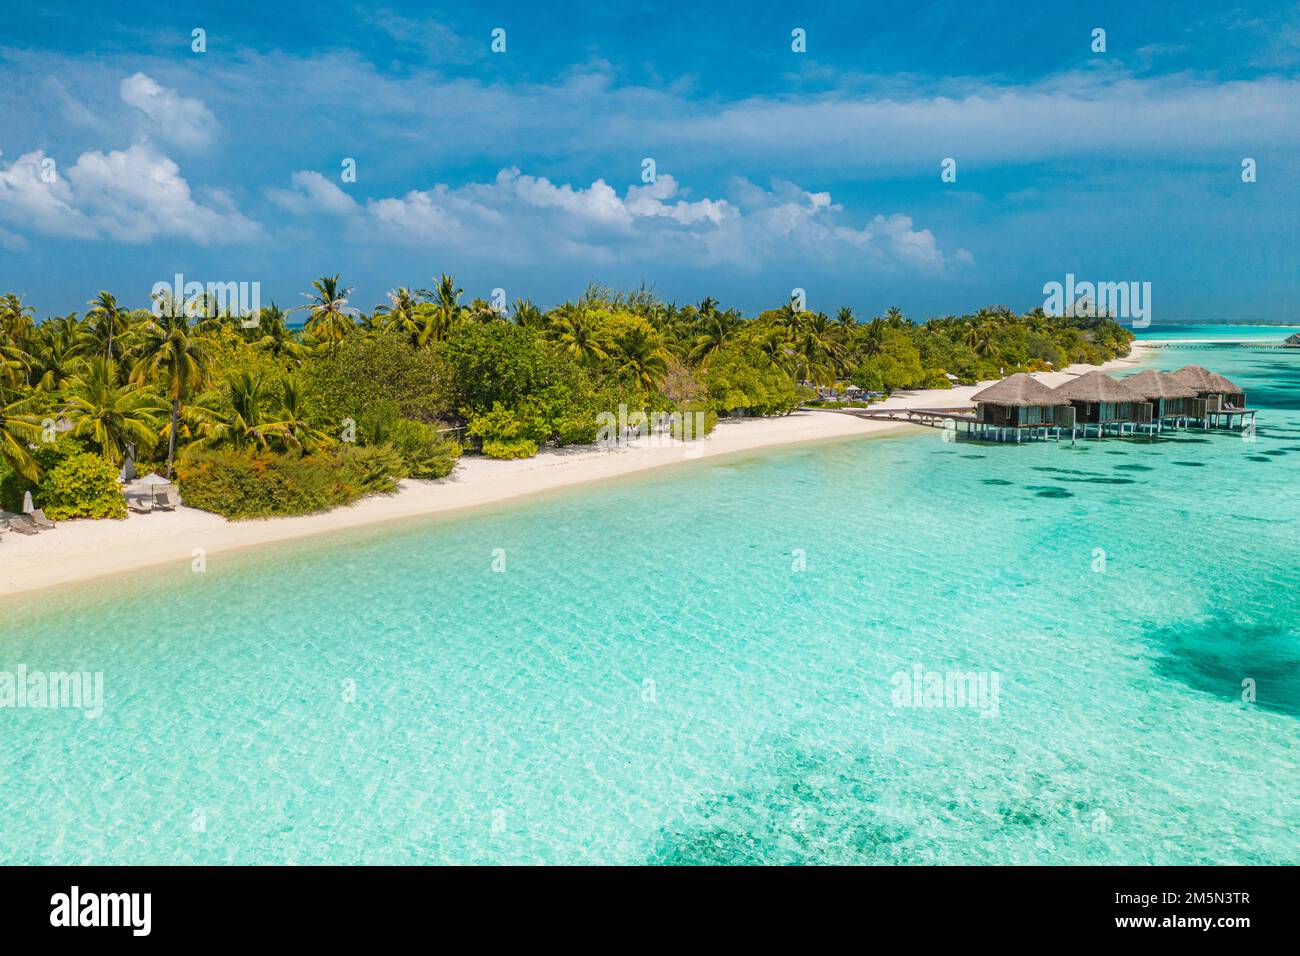 Perfect aerial landscape, luxury tropical resort with water villas. Beautiful island beach, palm trees, sunny sky. Amazing bird eyes view in Maldives Stock Photo